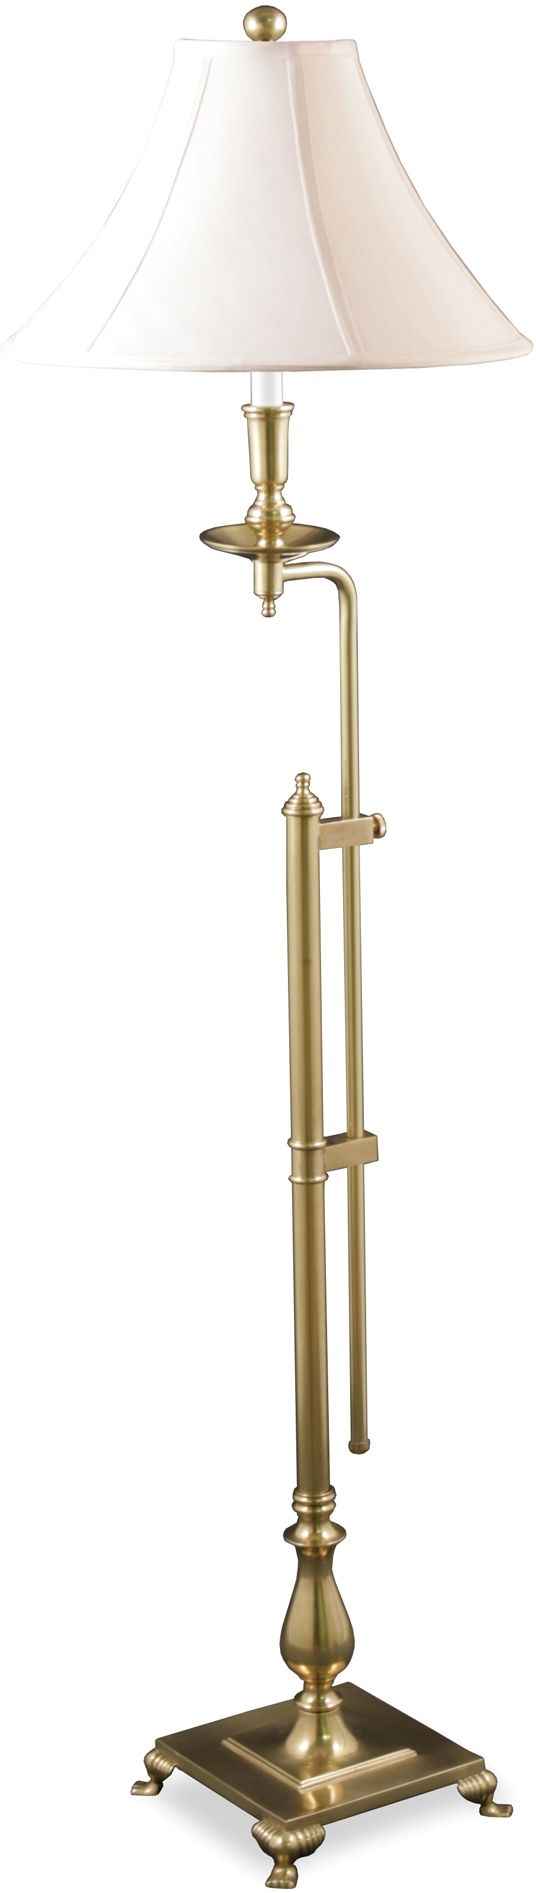 55 62 Inch Antique Solid Brass Floor Lamp Qf 6652fangio Lighting At  Bruce Furniture & Flooring For 62 Inch Floor Lamps (View 14 of 20)